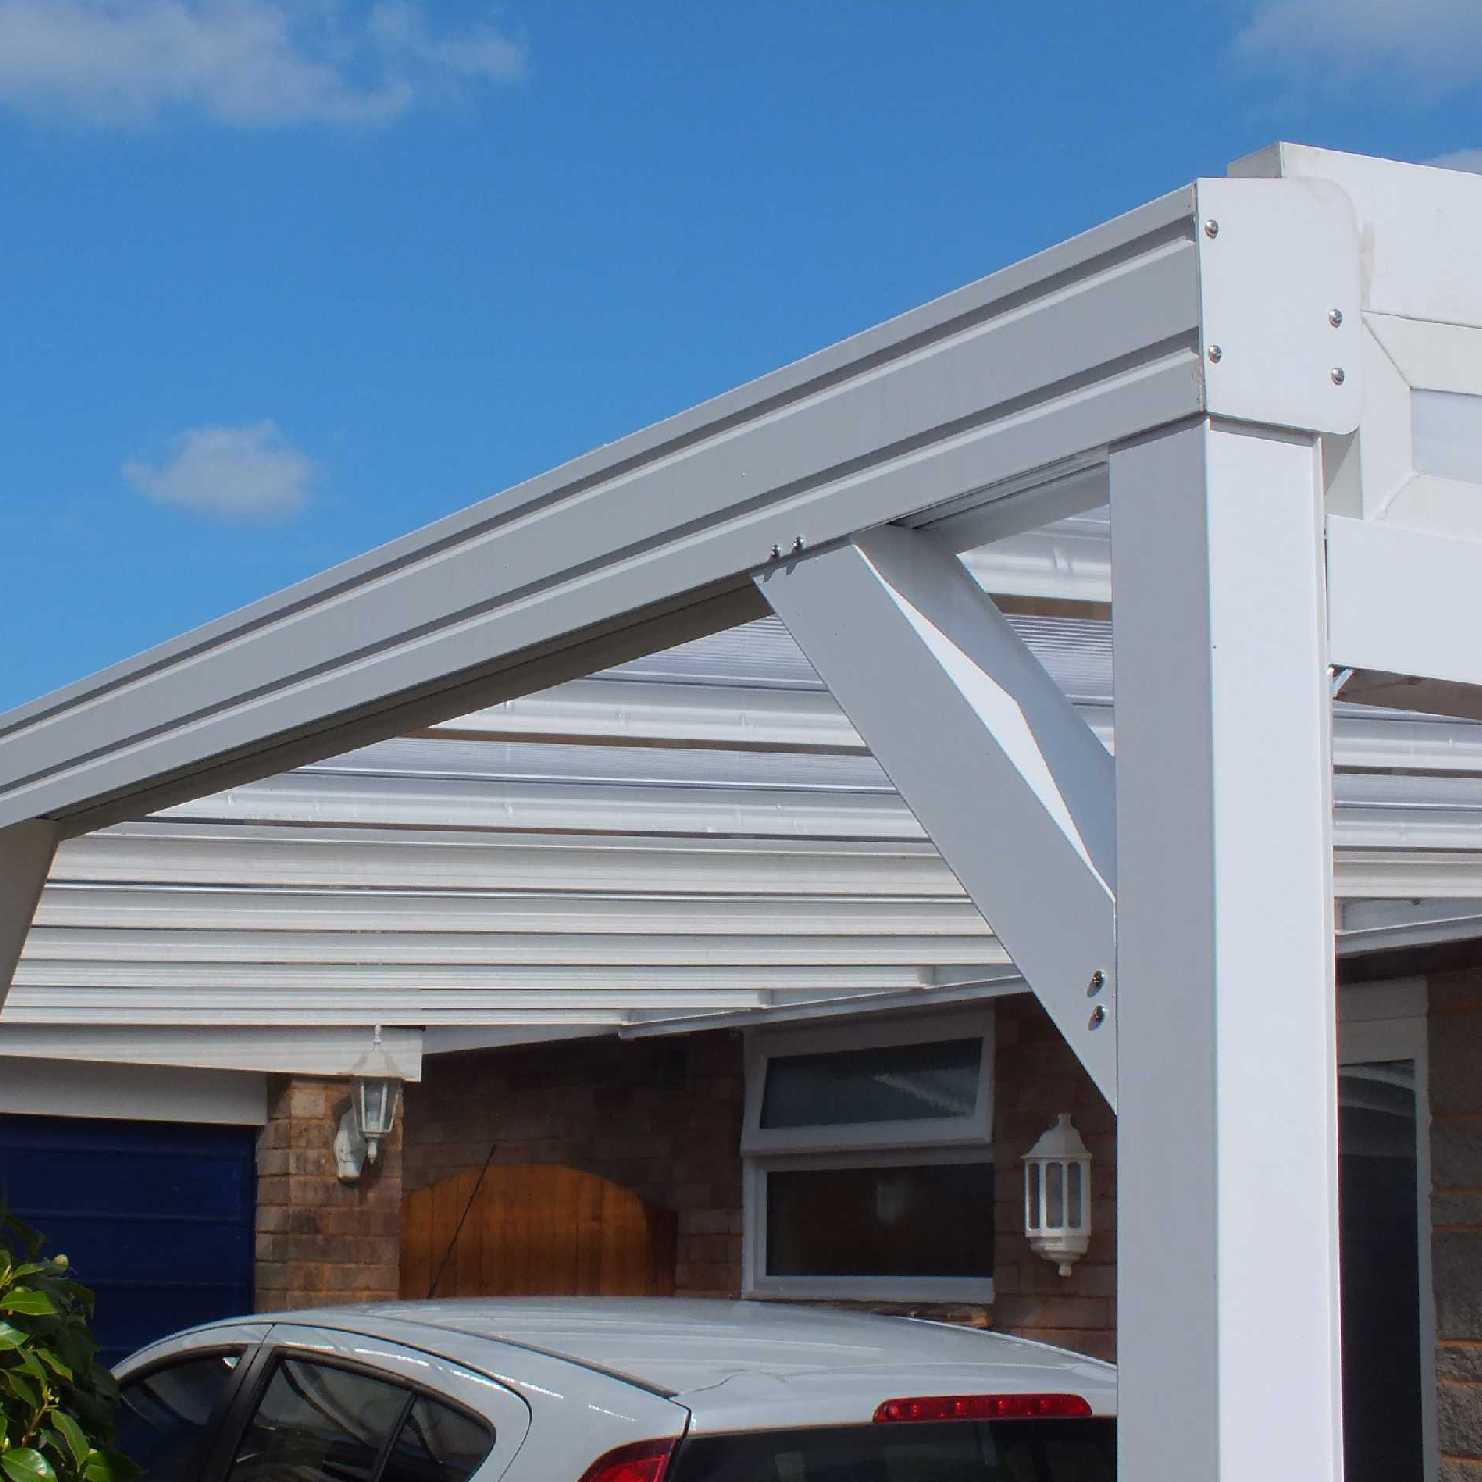 Buy Omega Smart Lean-To Canopy, White with 16mm Polycarbonate Glazing - 5.2m (W) x 1.5m (P), (3) Supporting Posts online today